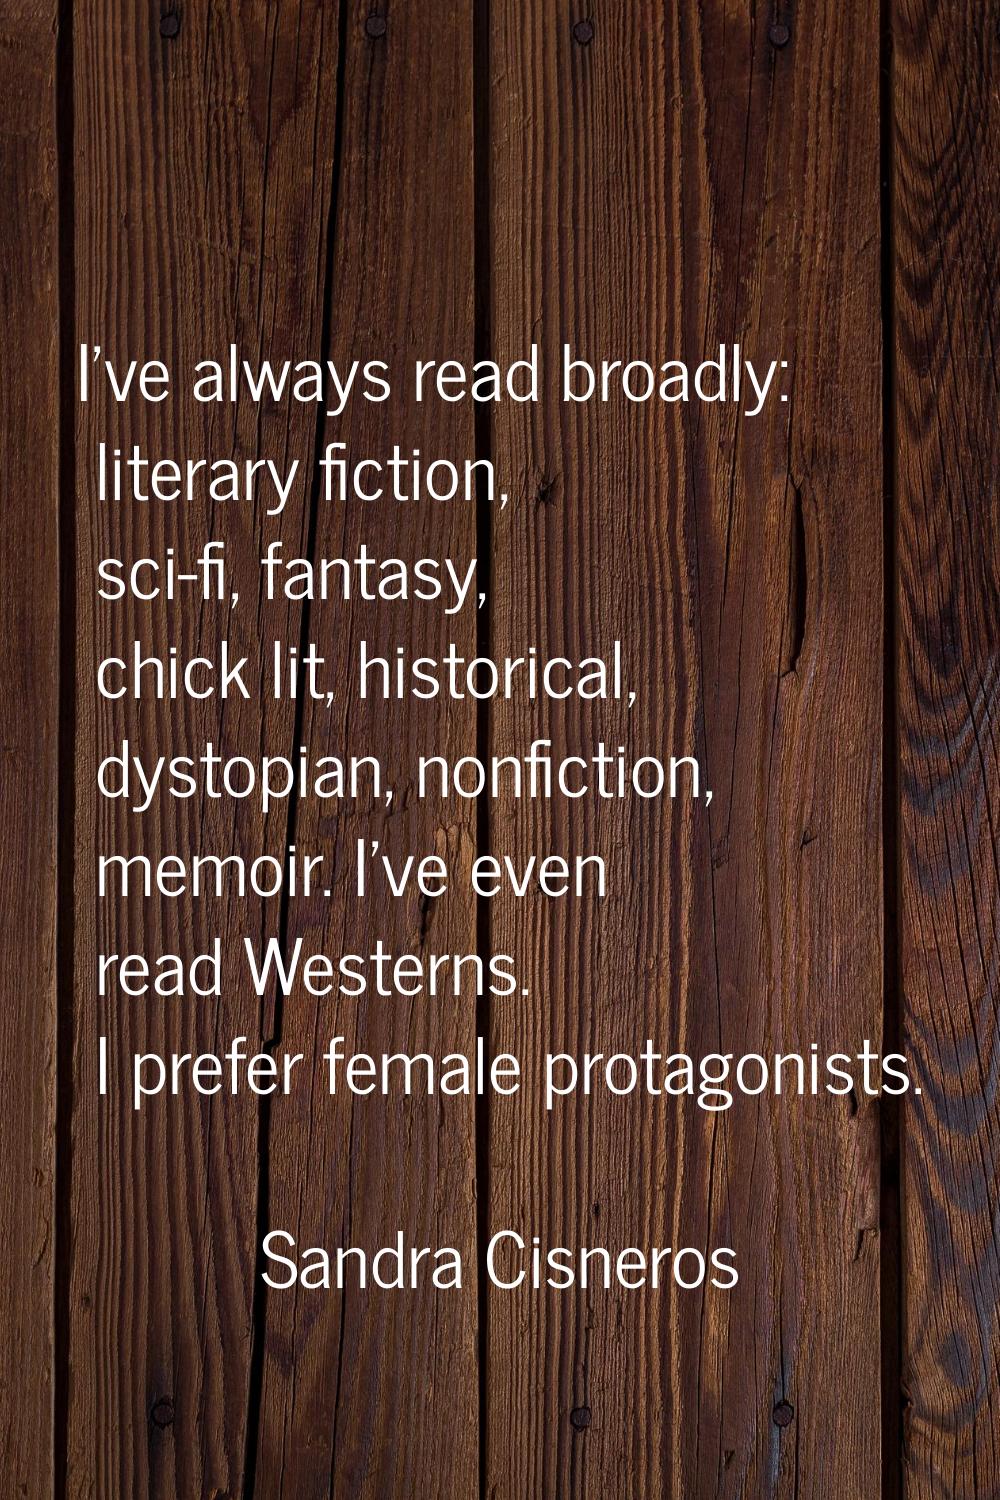 I've always read broadly: literary fiction, sci-fi, fantasy, chick lit, historical, dystopian, nonf